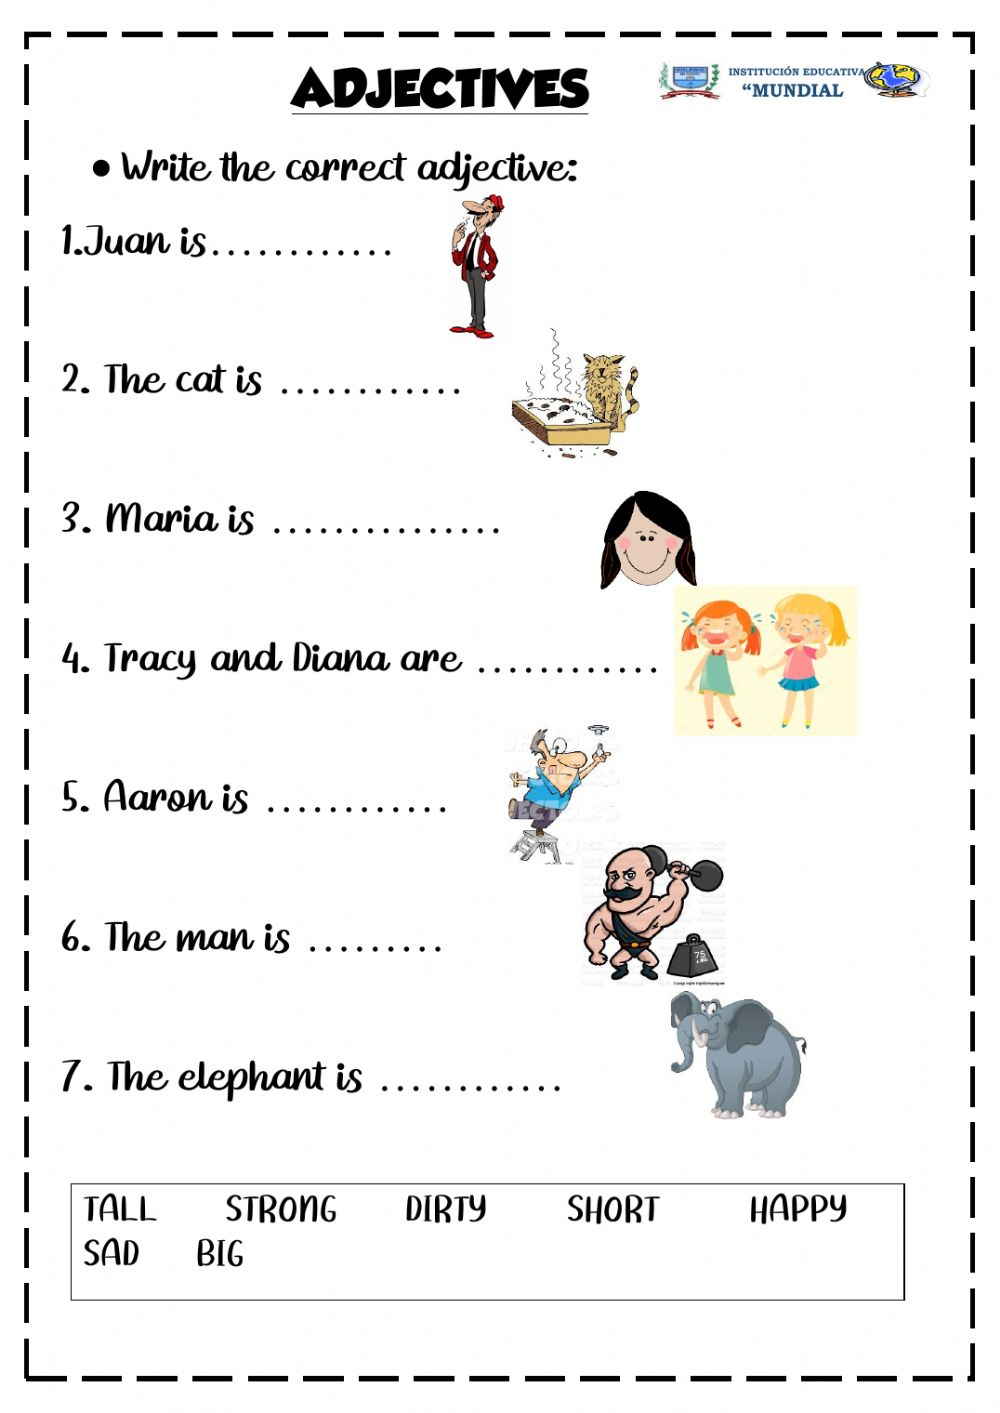 adjectives-online-exercise-for-grade-4-adjectiveworksheets